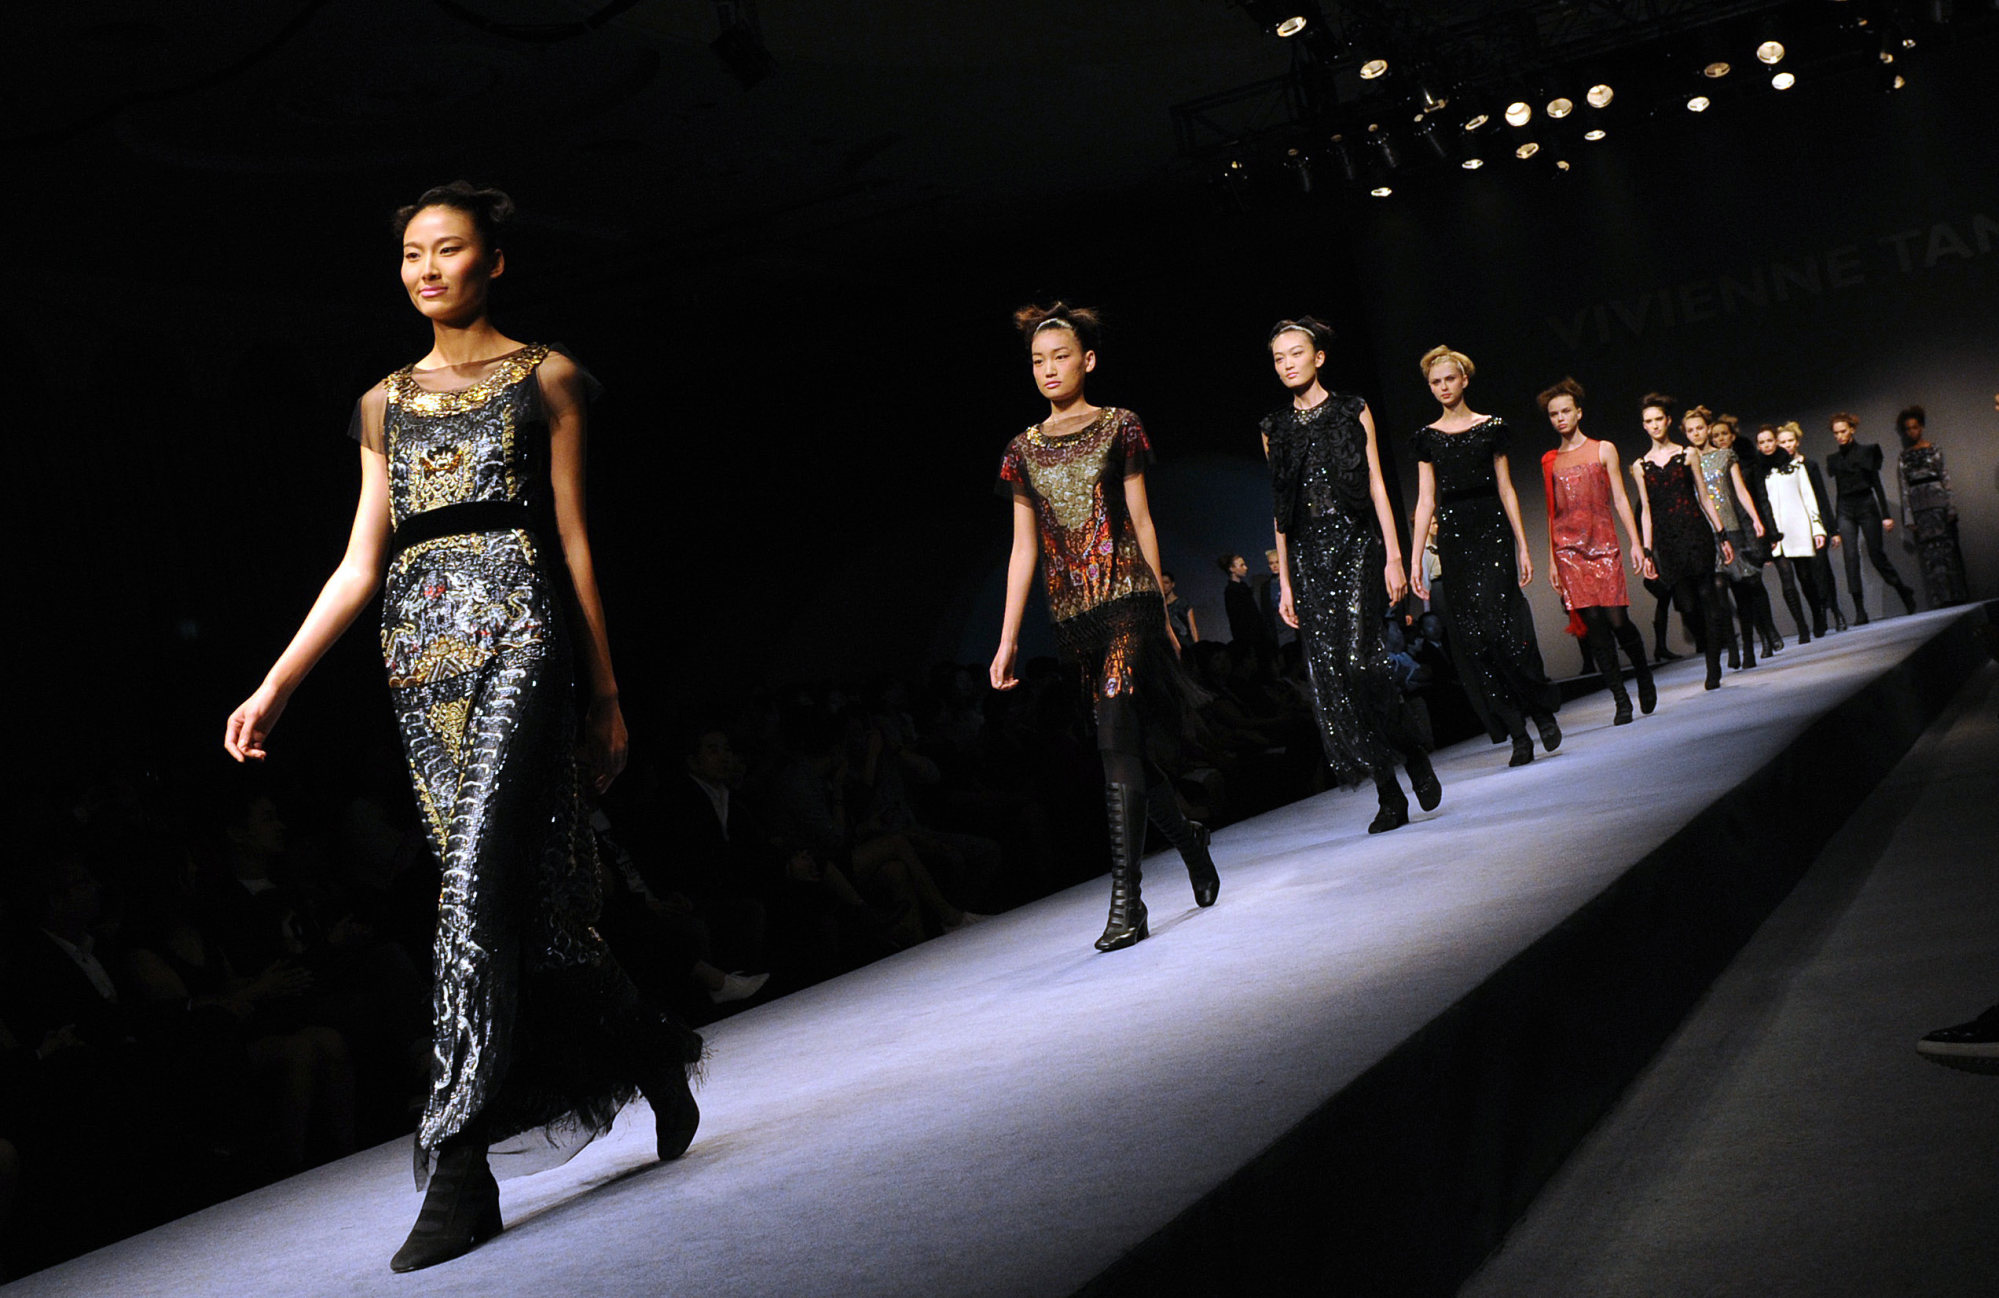 Hong Kong fashion designer Vivienne Tam looks to NFTs and the metaverse ...